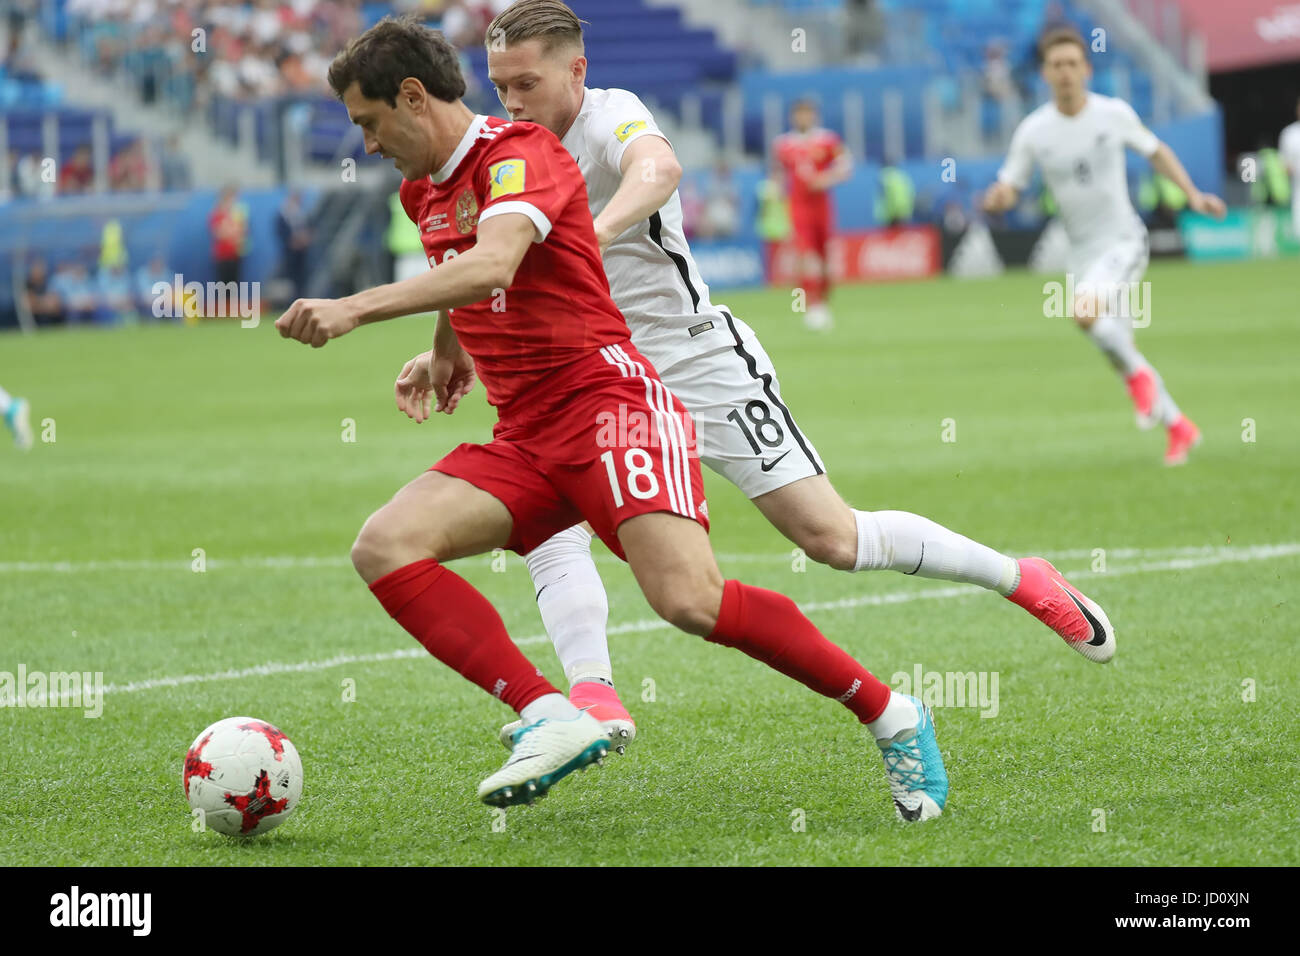 St. Petersburg, Russia. 17th June, 2017. Yury Zhirkov (L) of Russia vies with Kip Colvey of New Zealand during the group A match between Russia and New Zealand of the 2017 FIFA Confederations Cup in St. Petersburg, Russia, on June 17, 2017. Russia won 2-0. Credit: Xu Zijian/Xinhua/Alamy Live News Stock Photo